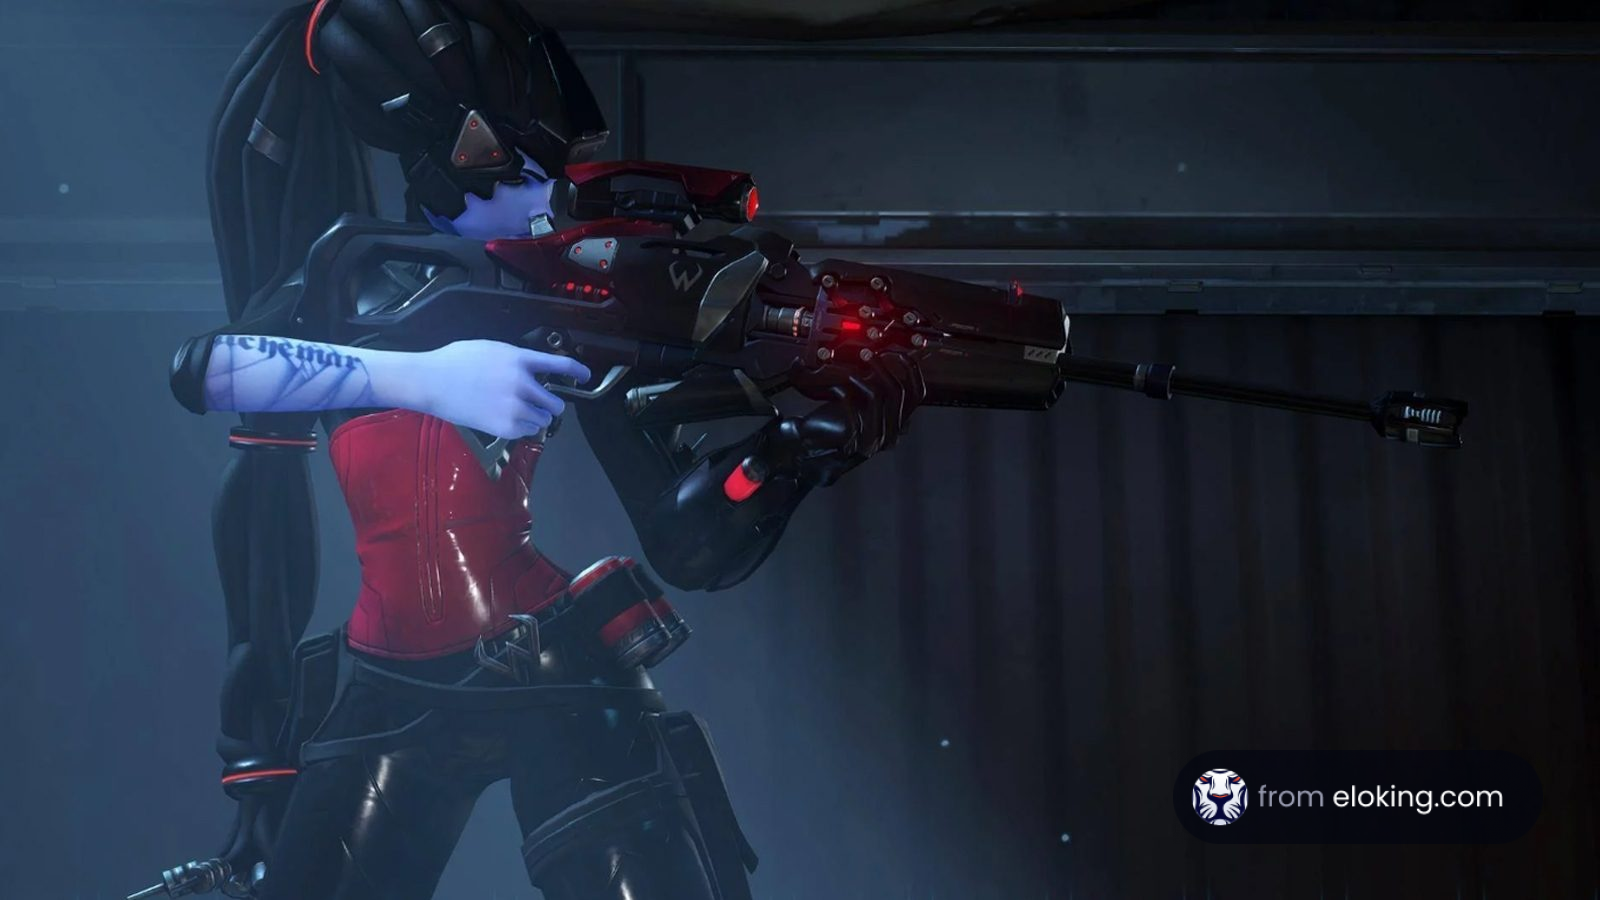 Blue-haired character in futuristic armor aiming a laser gun in a dark setting